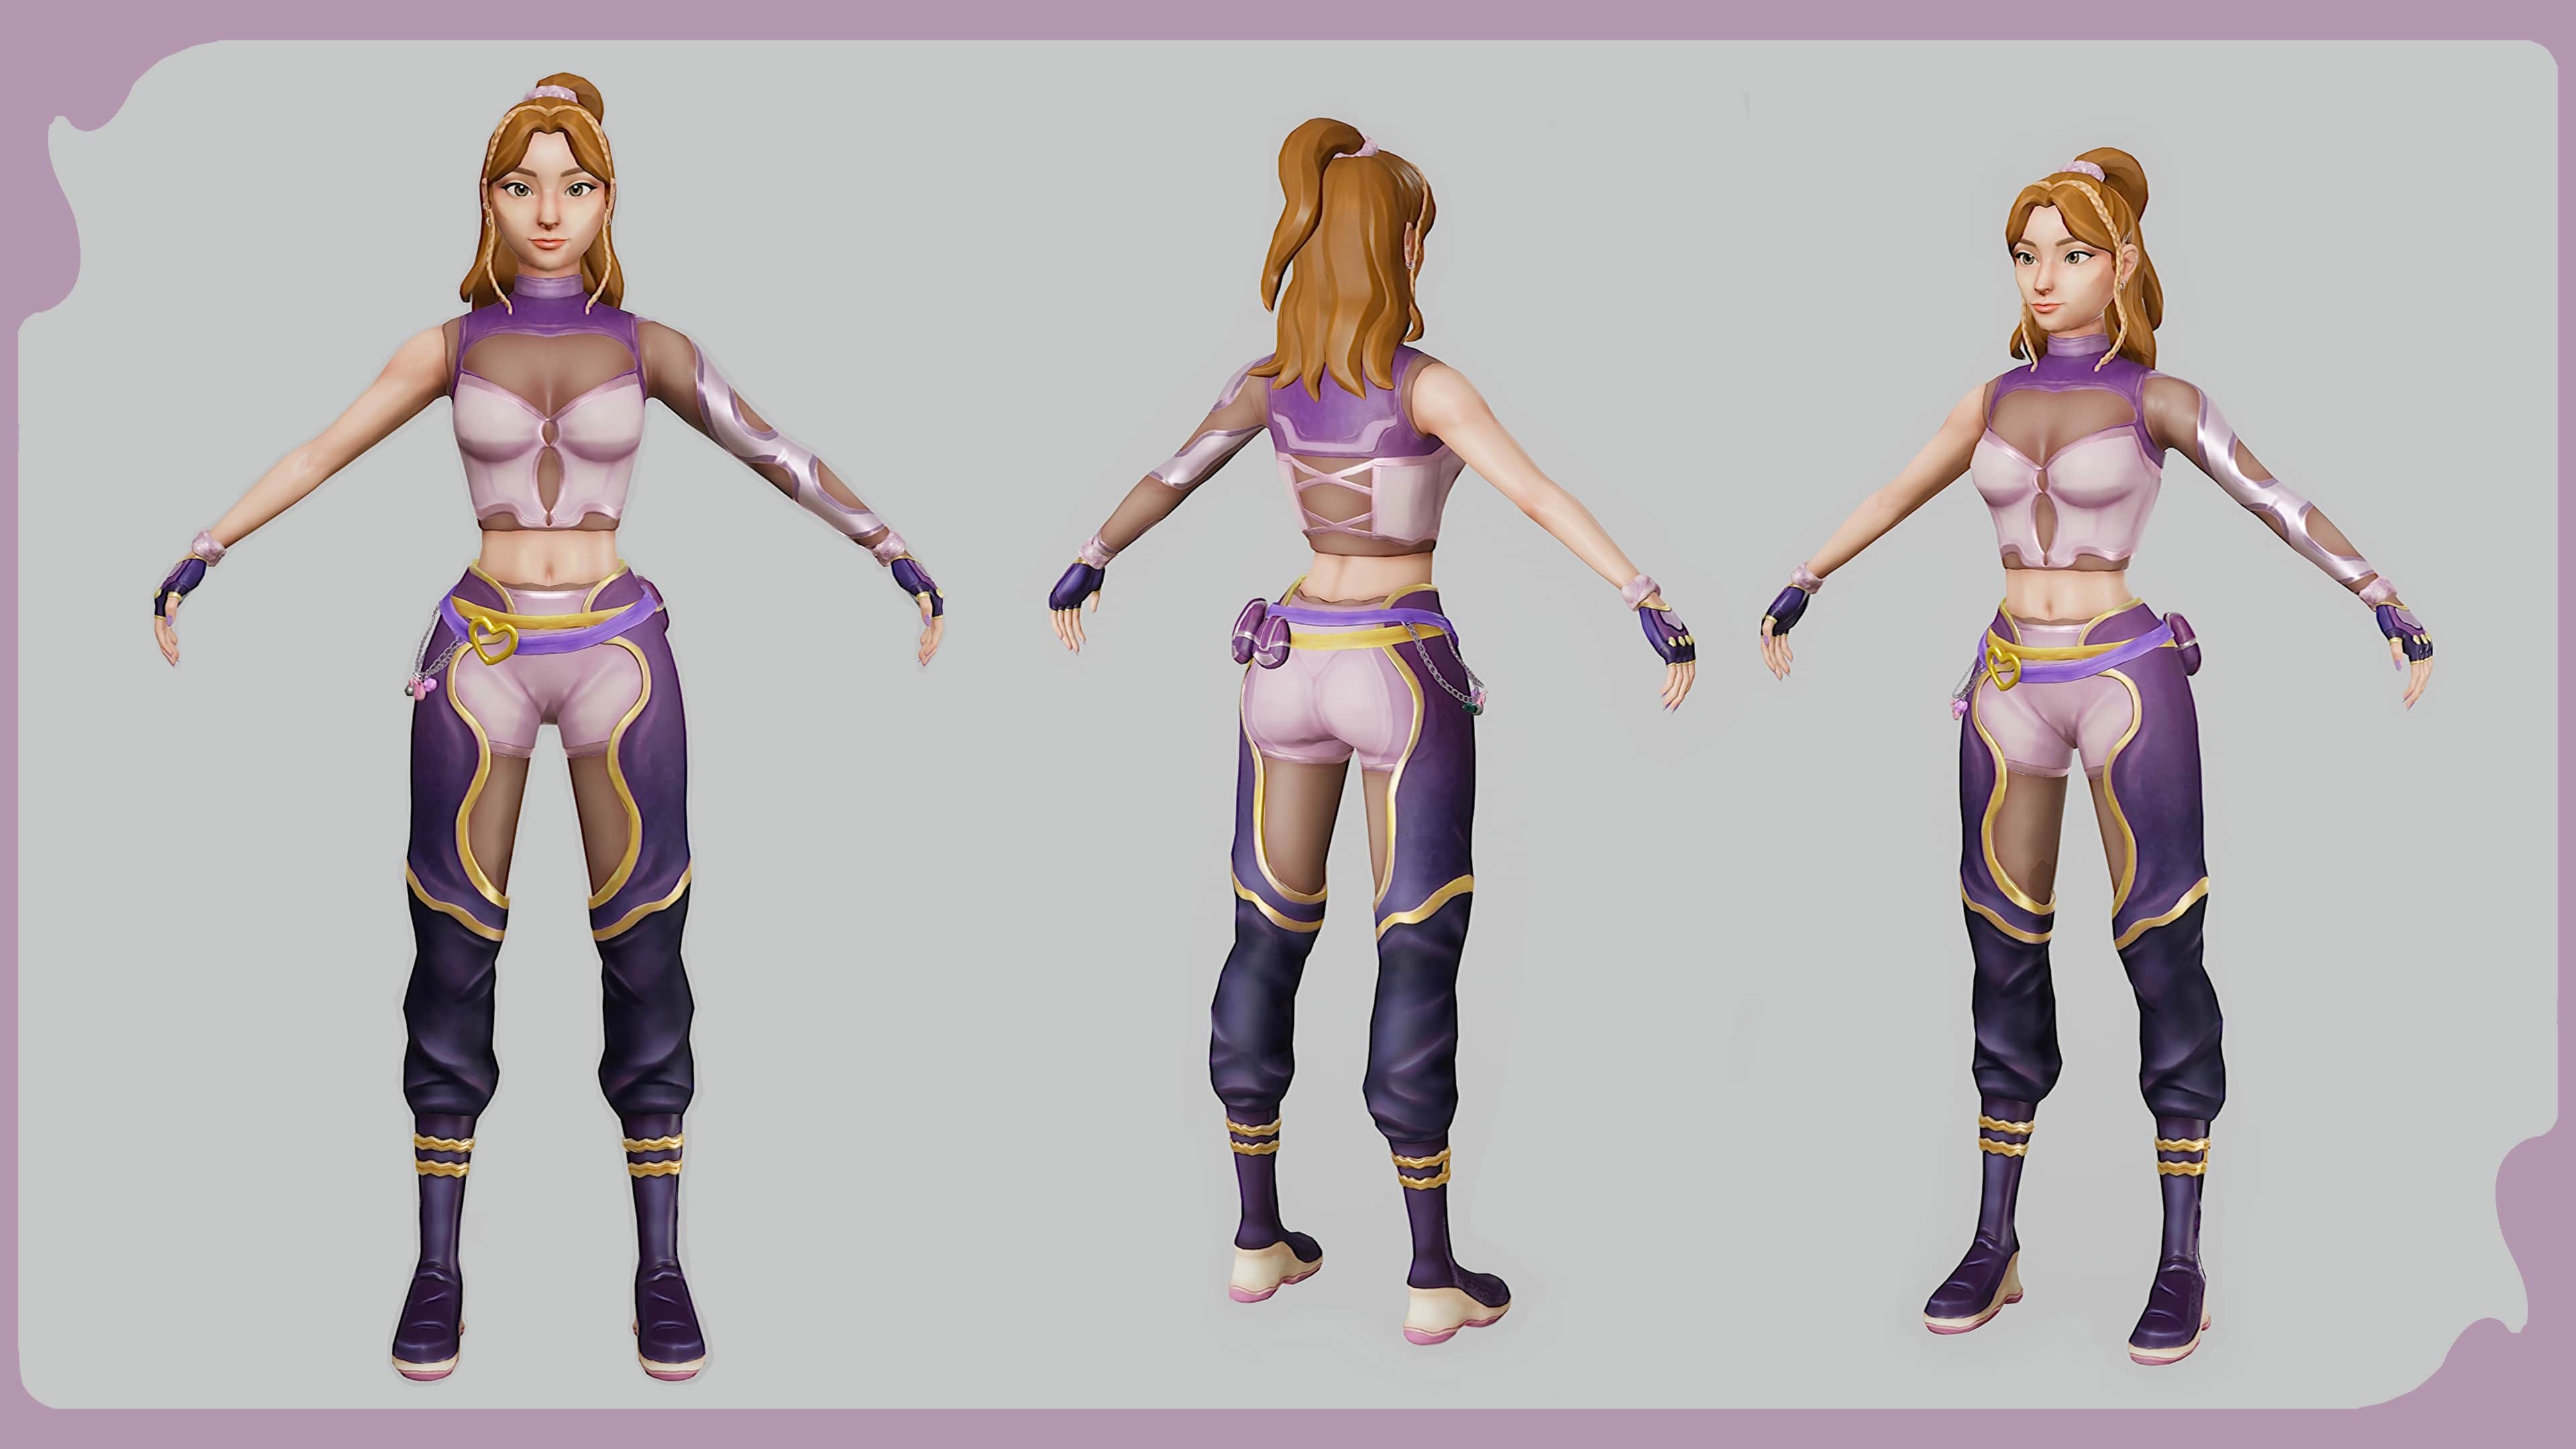 A female 3D character model viewed from three different angles in the style of Valorant